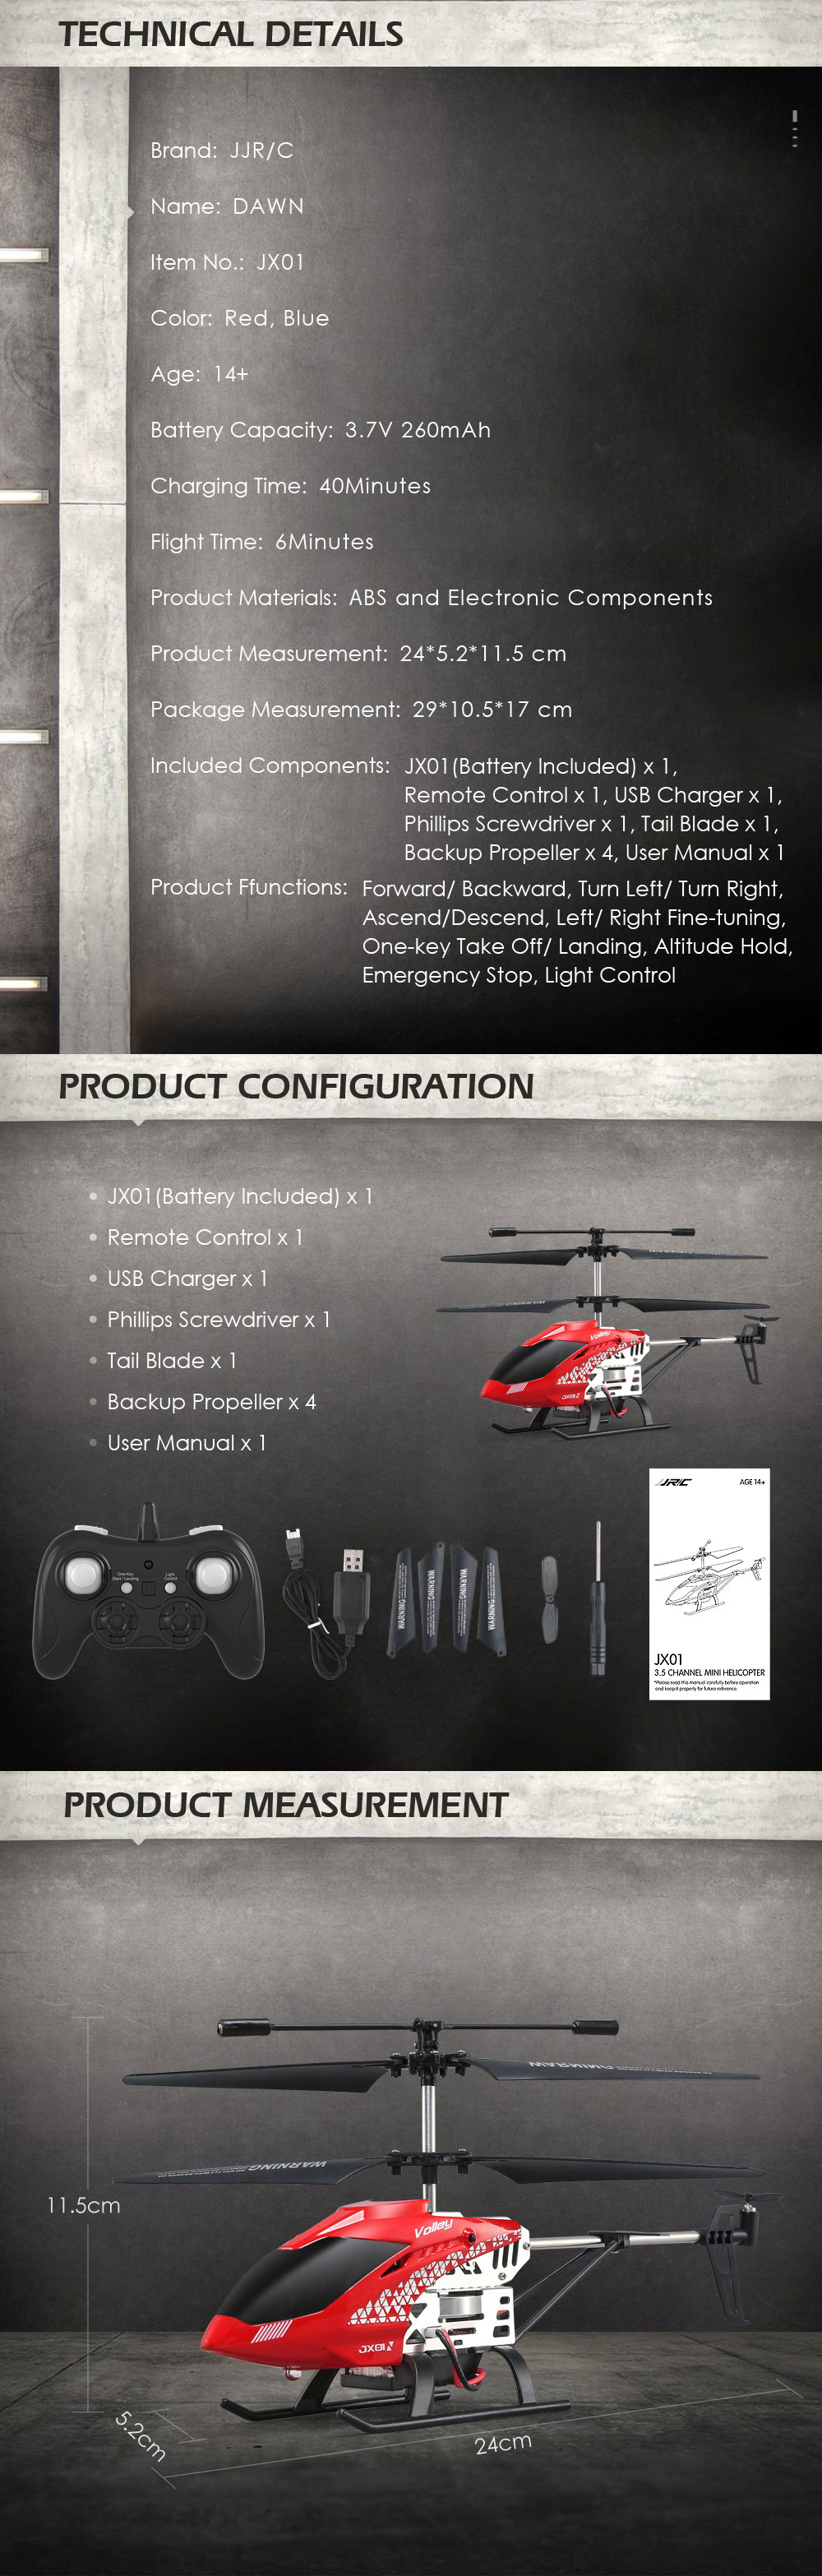 JJRC-JX01-24G-35CH-6-Axis-Gyro-With-Altitude-Hold-Alloy-RC-Helicopter-1331017